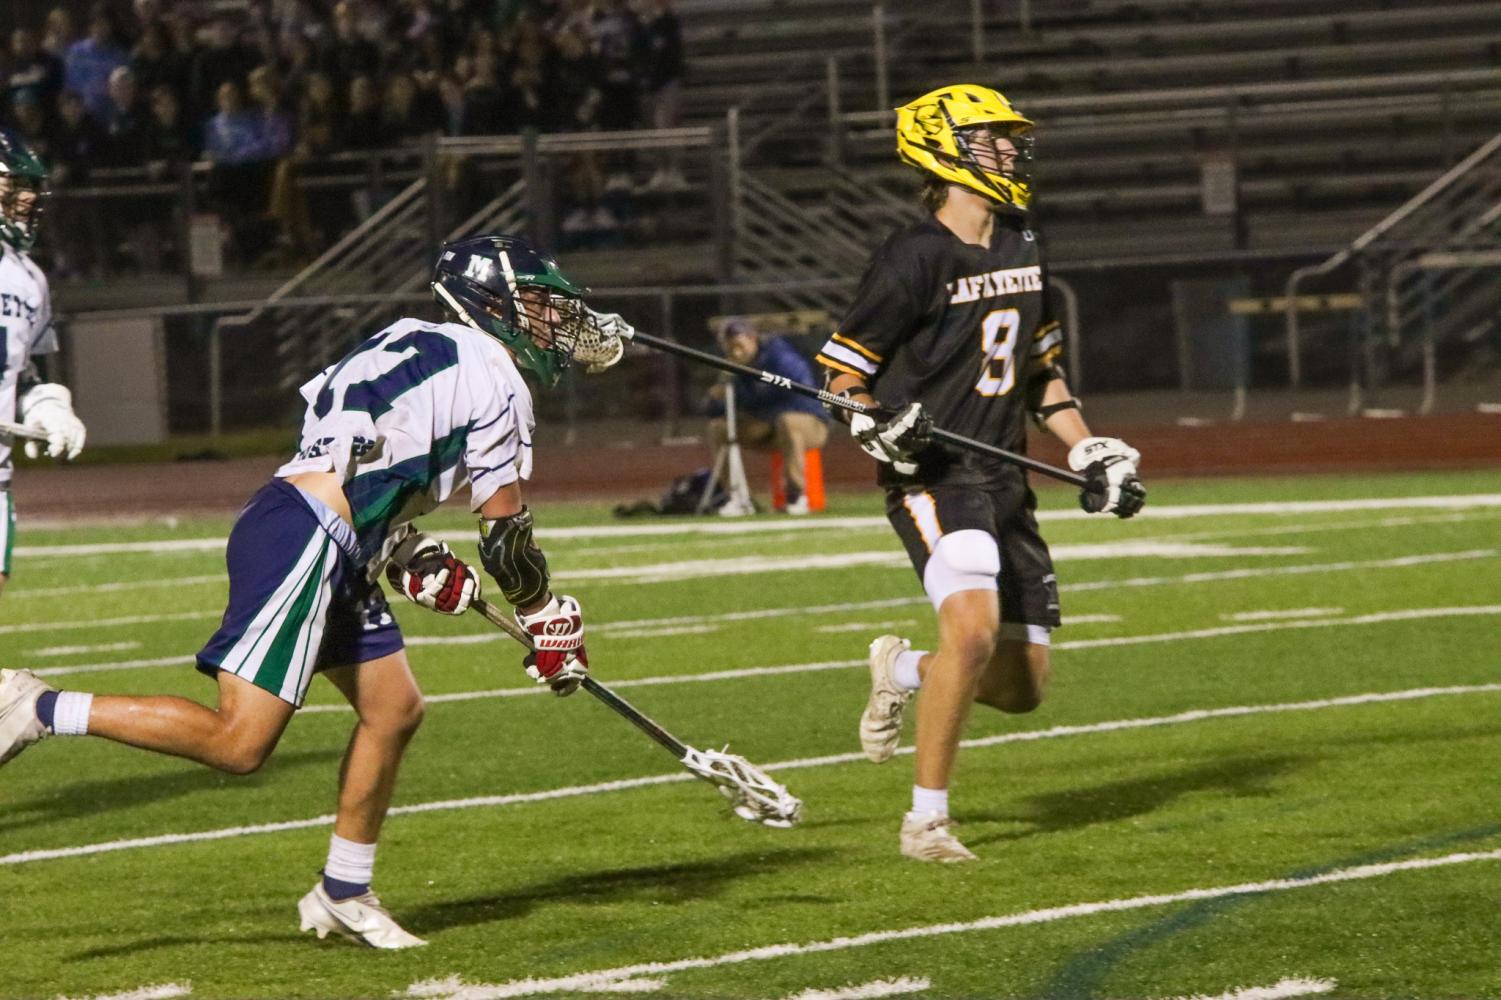 Photo+Gallery%3A+Boys+Lacrosse+Defeats+Lafayette+to+Advance+to+Second+Round+of+Playoffs